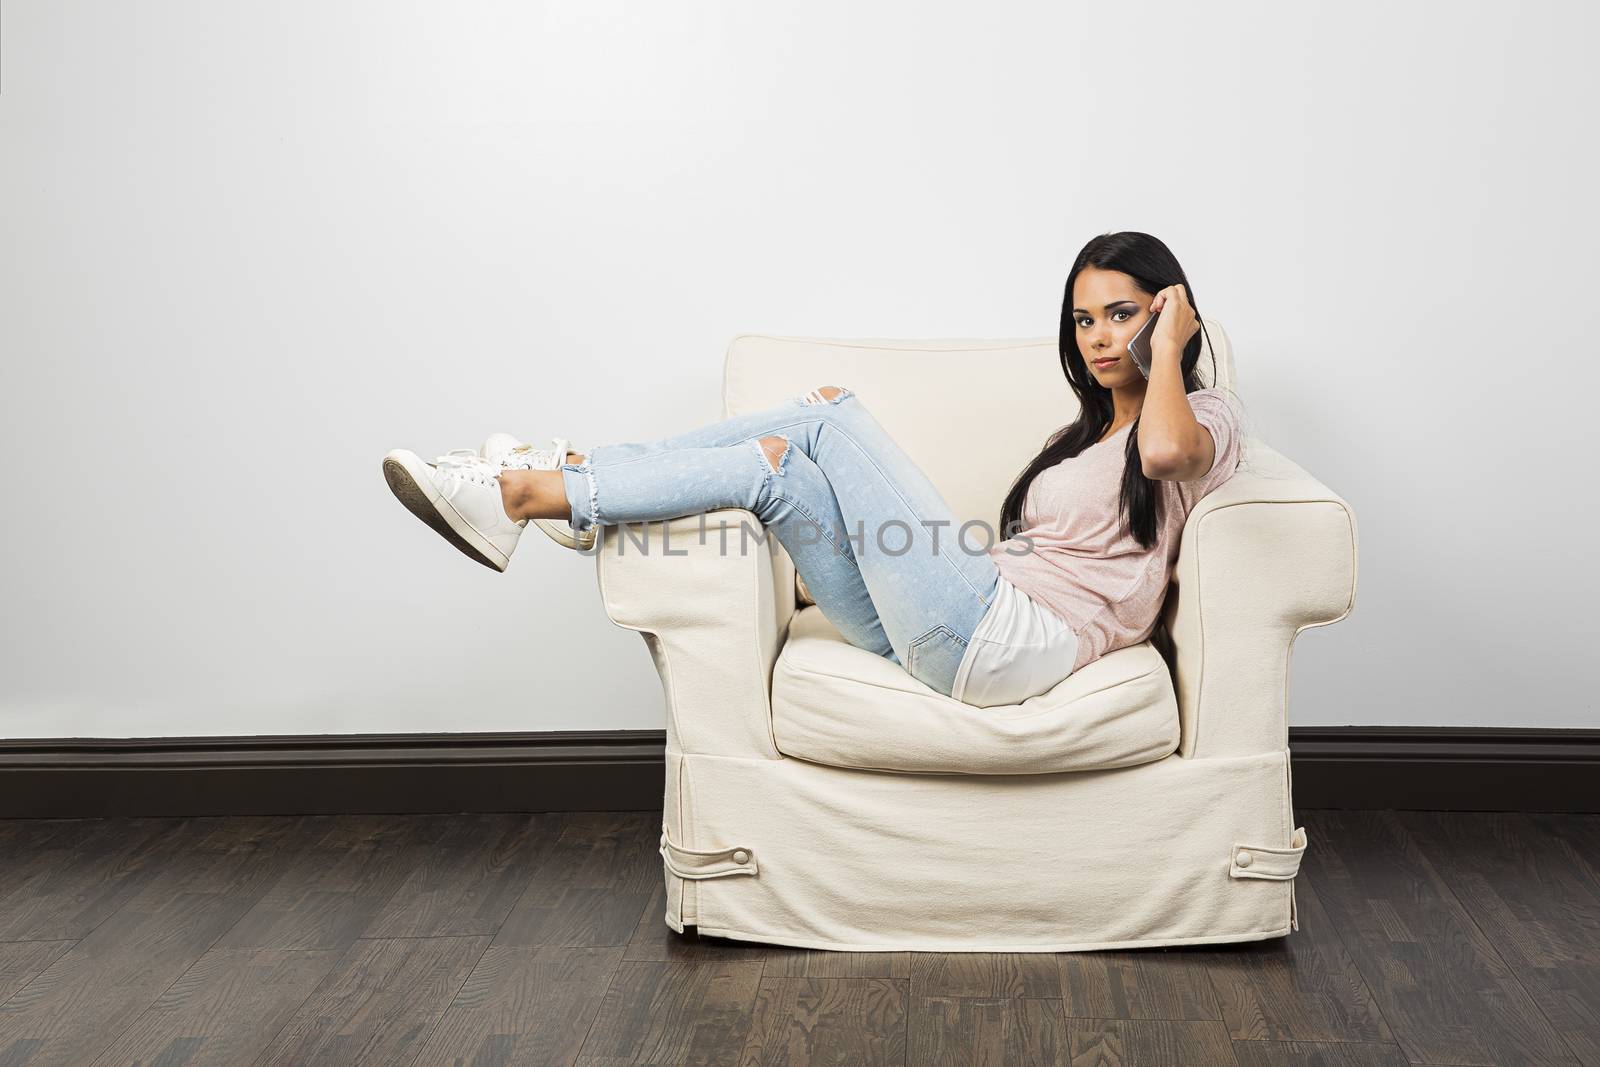 Young woman, with her legs up on a white couch, talking on a phone